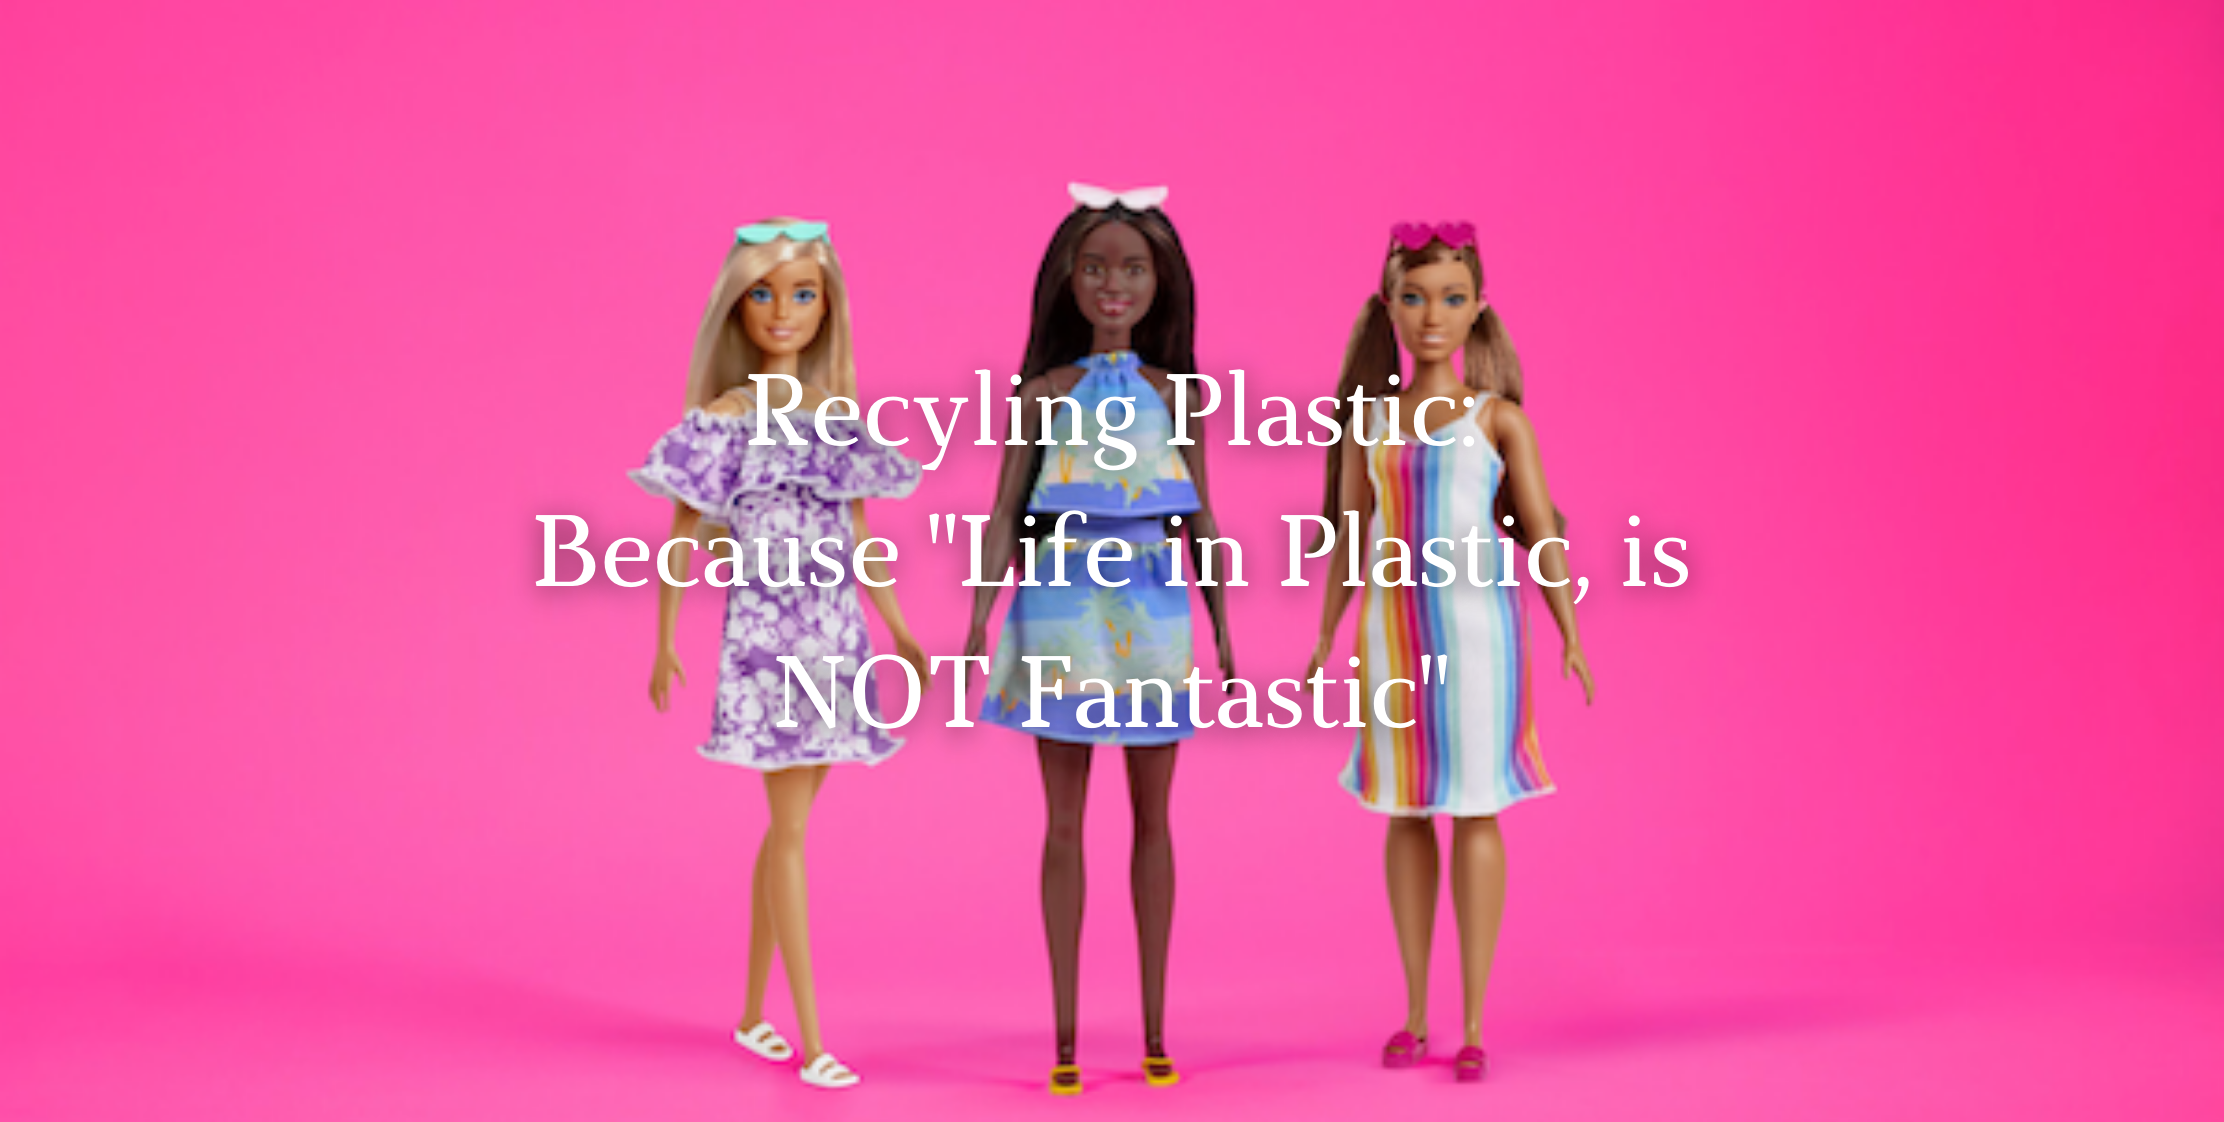 Why We Need to Recycle image